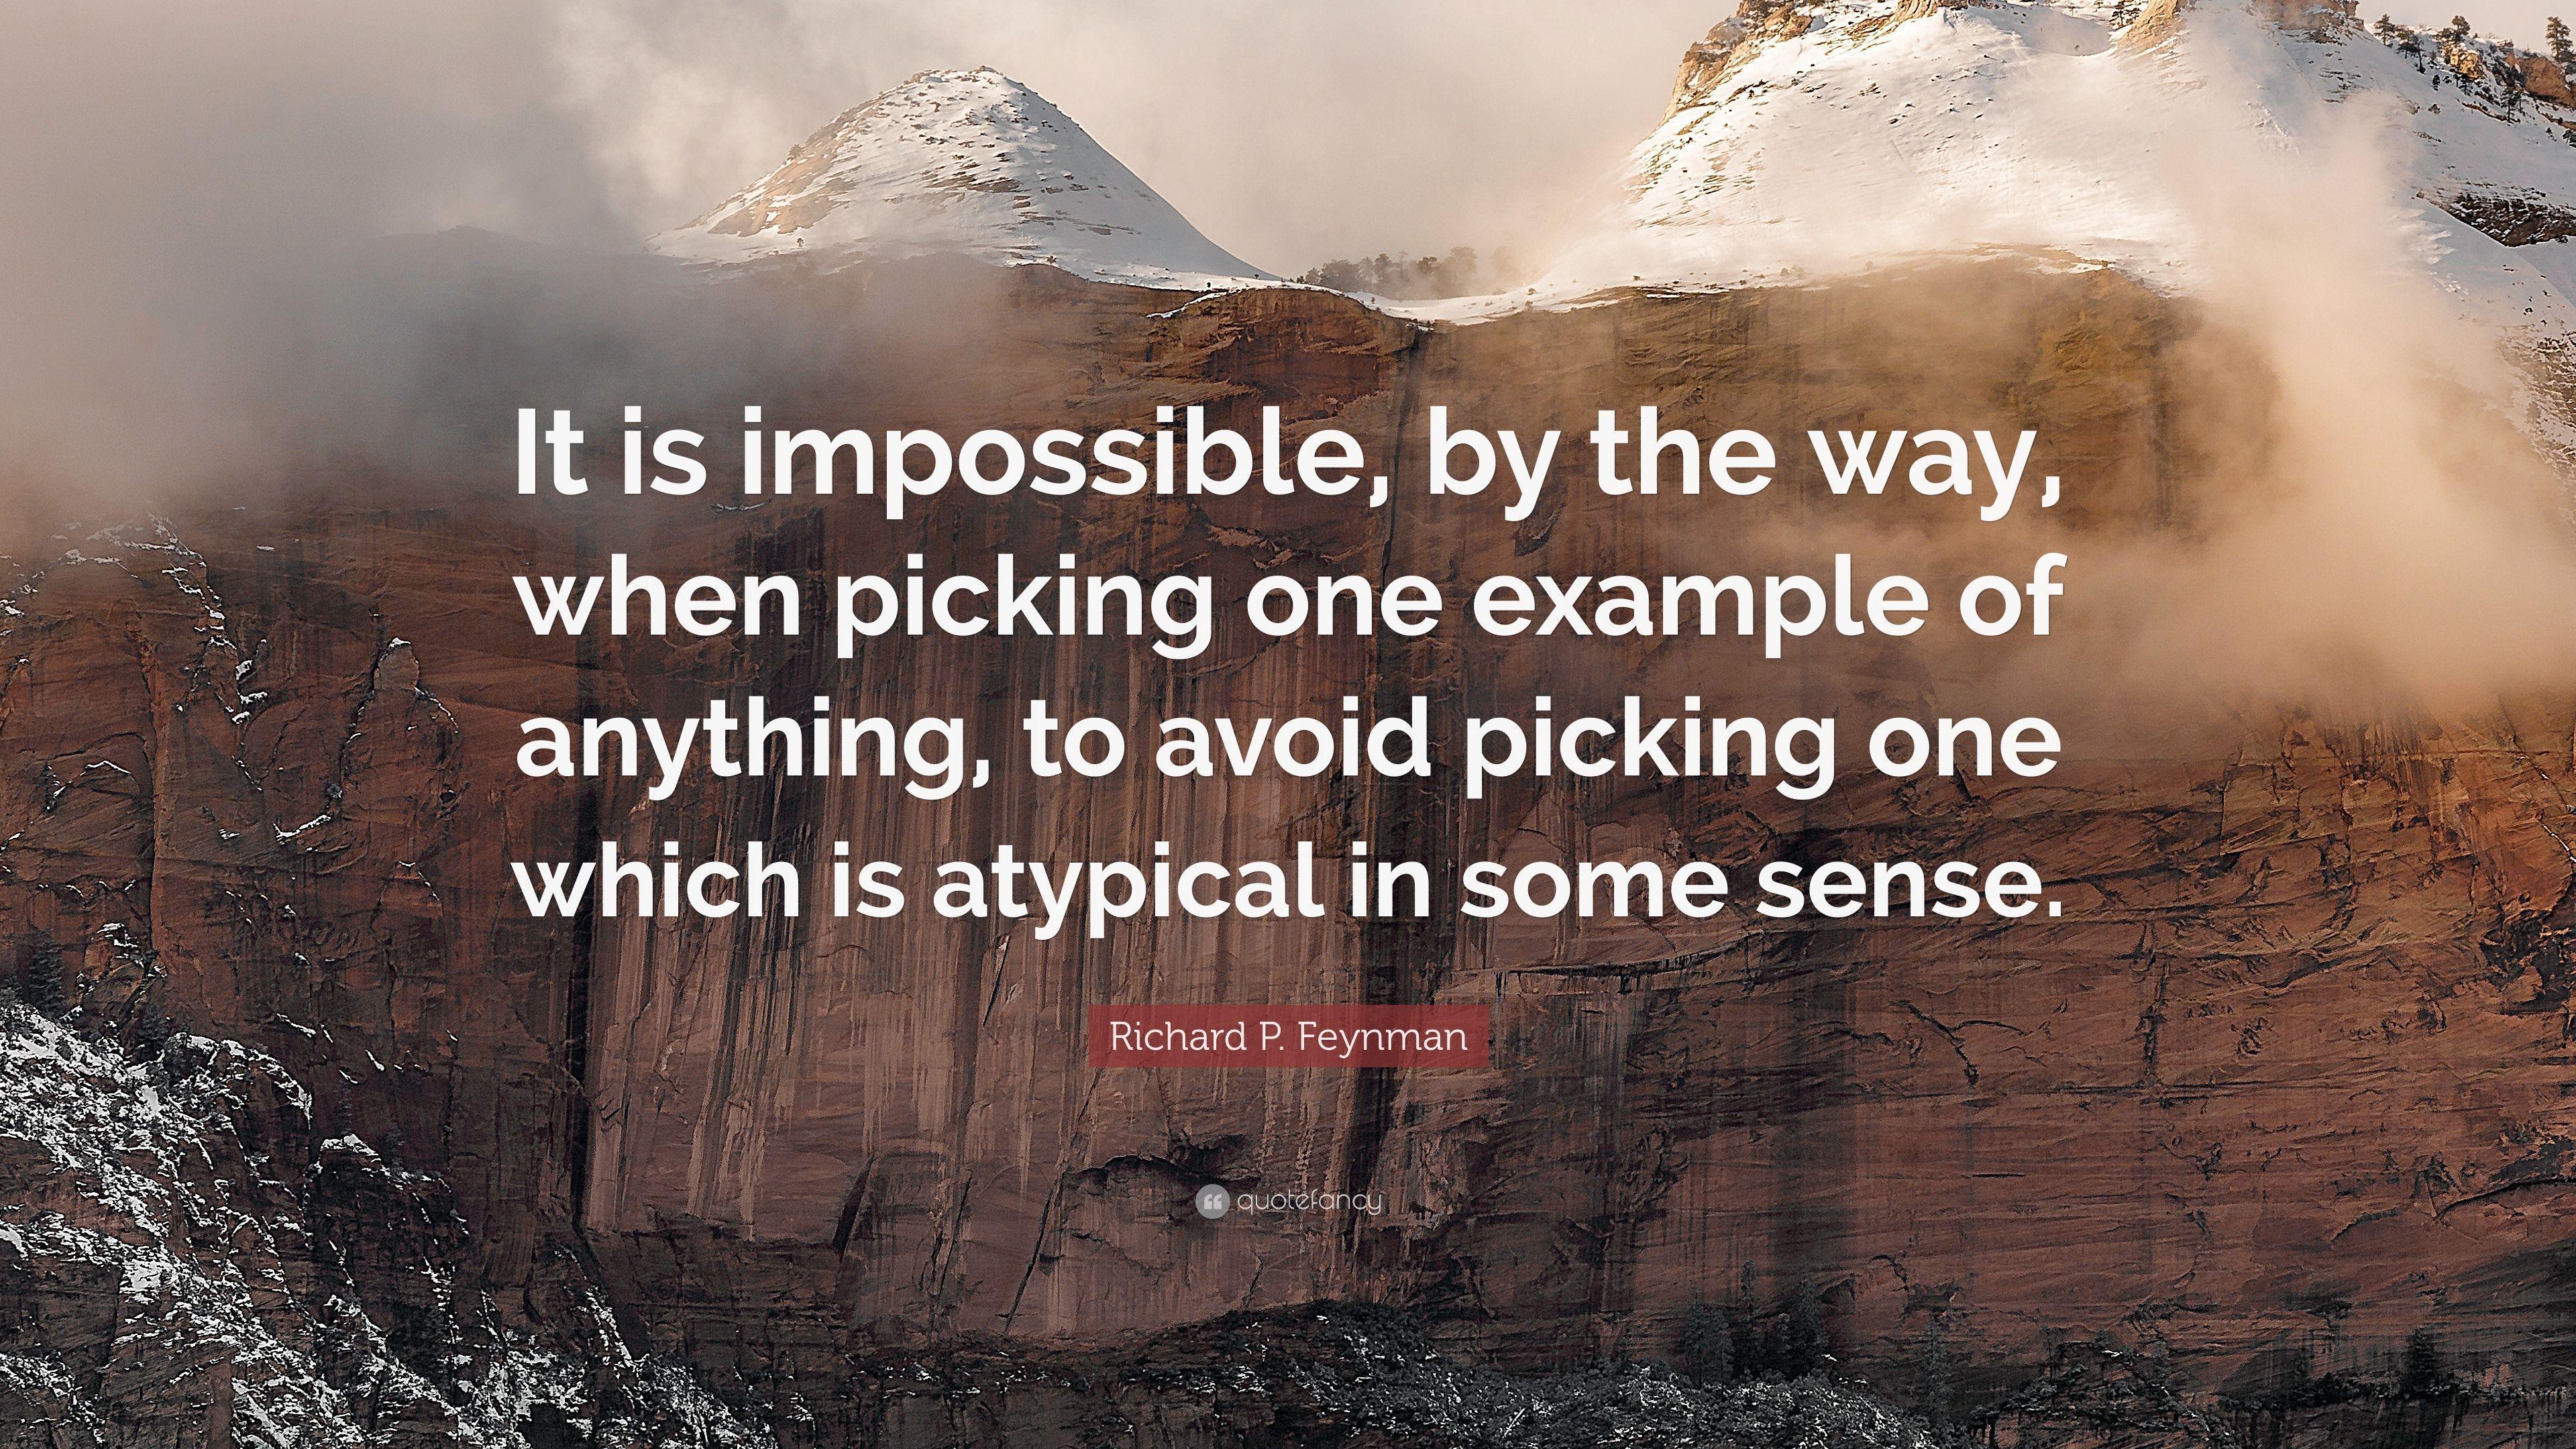 Richard P. Feynman Quote: “It is impossible, by the way, when